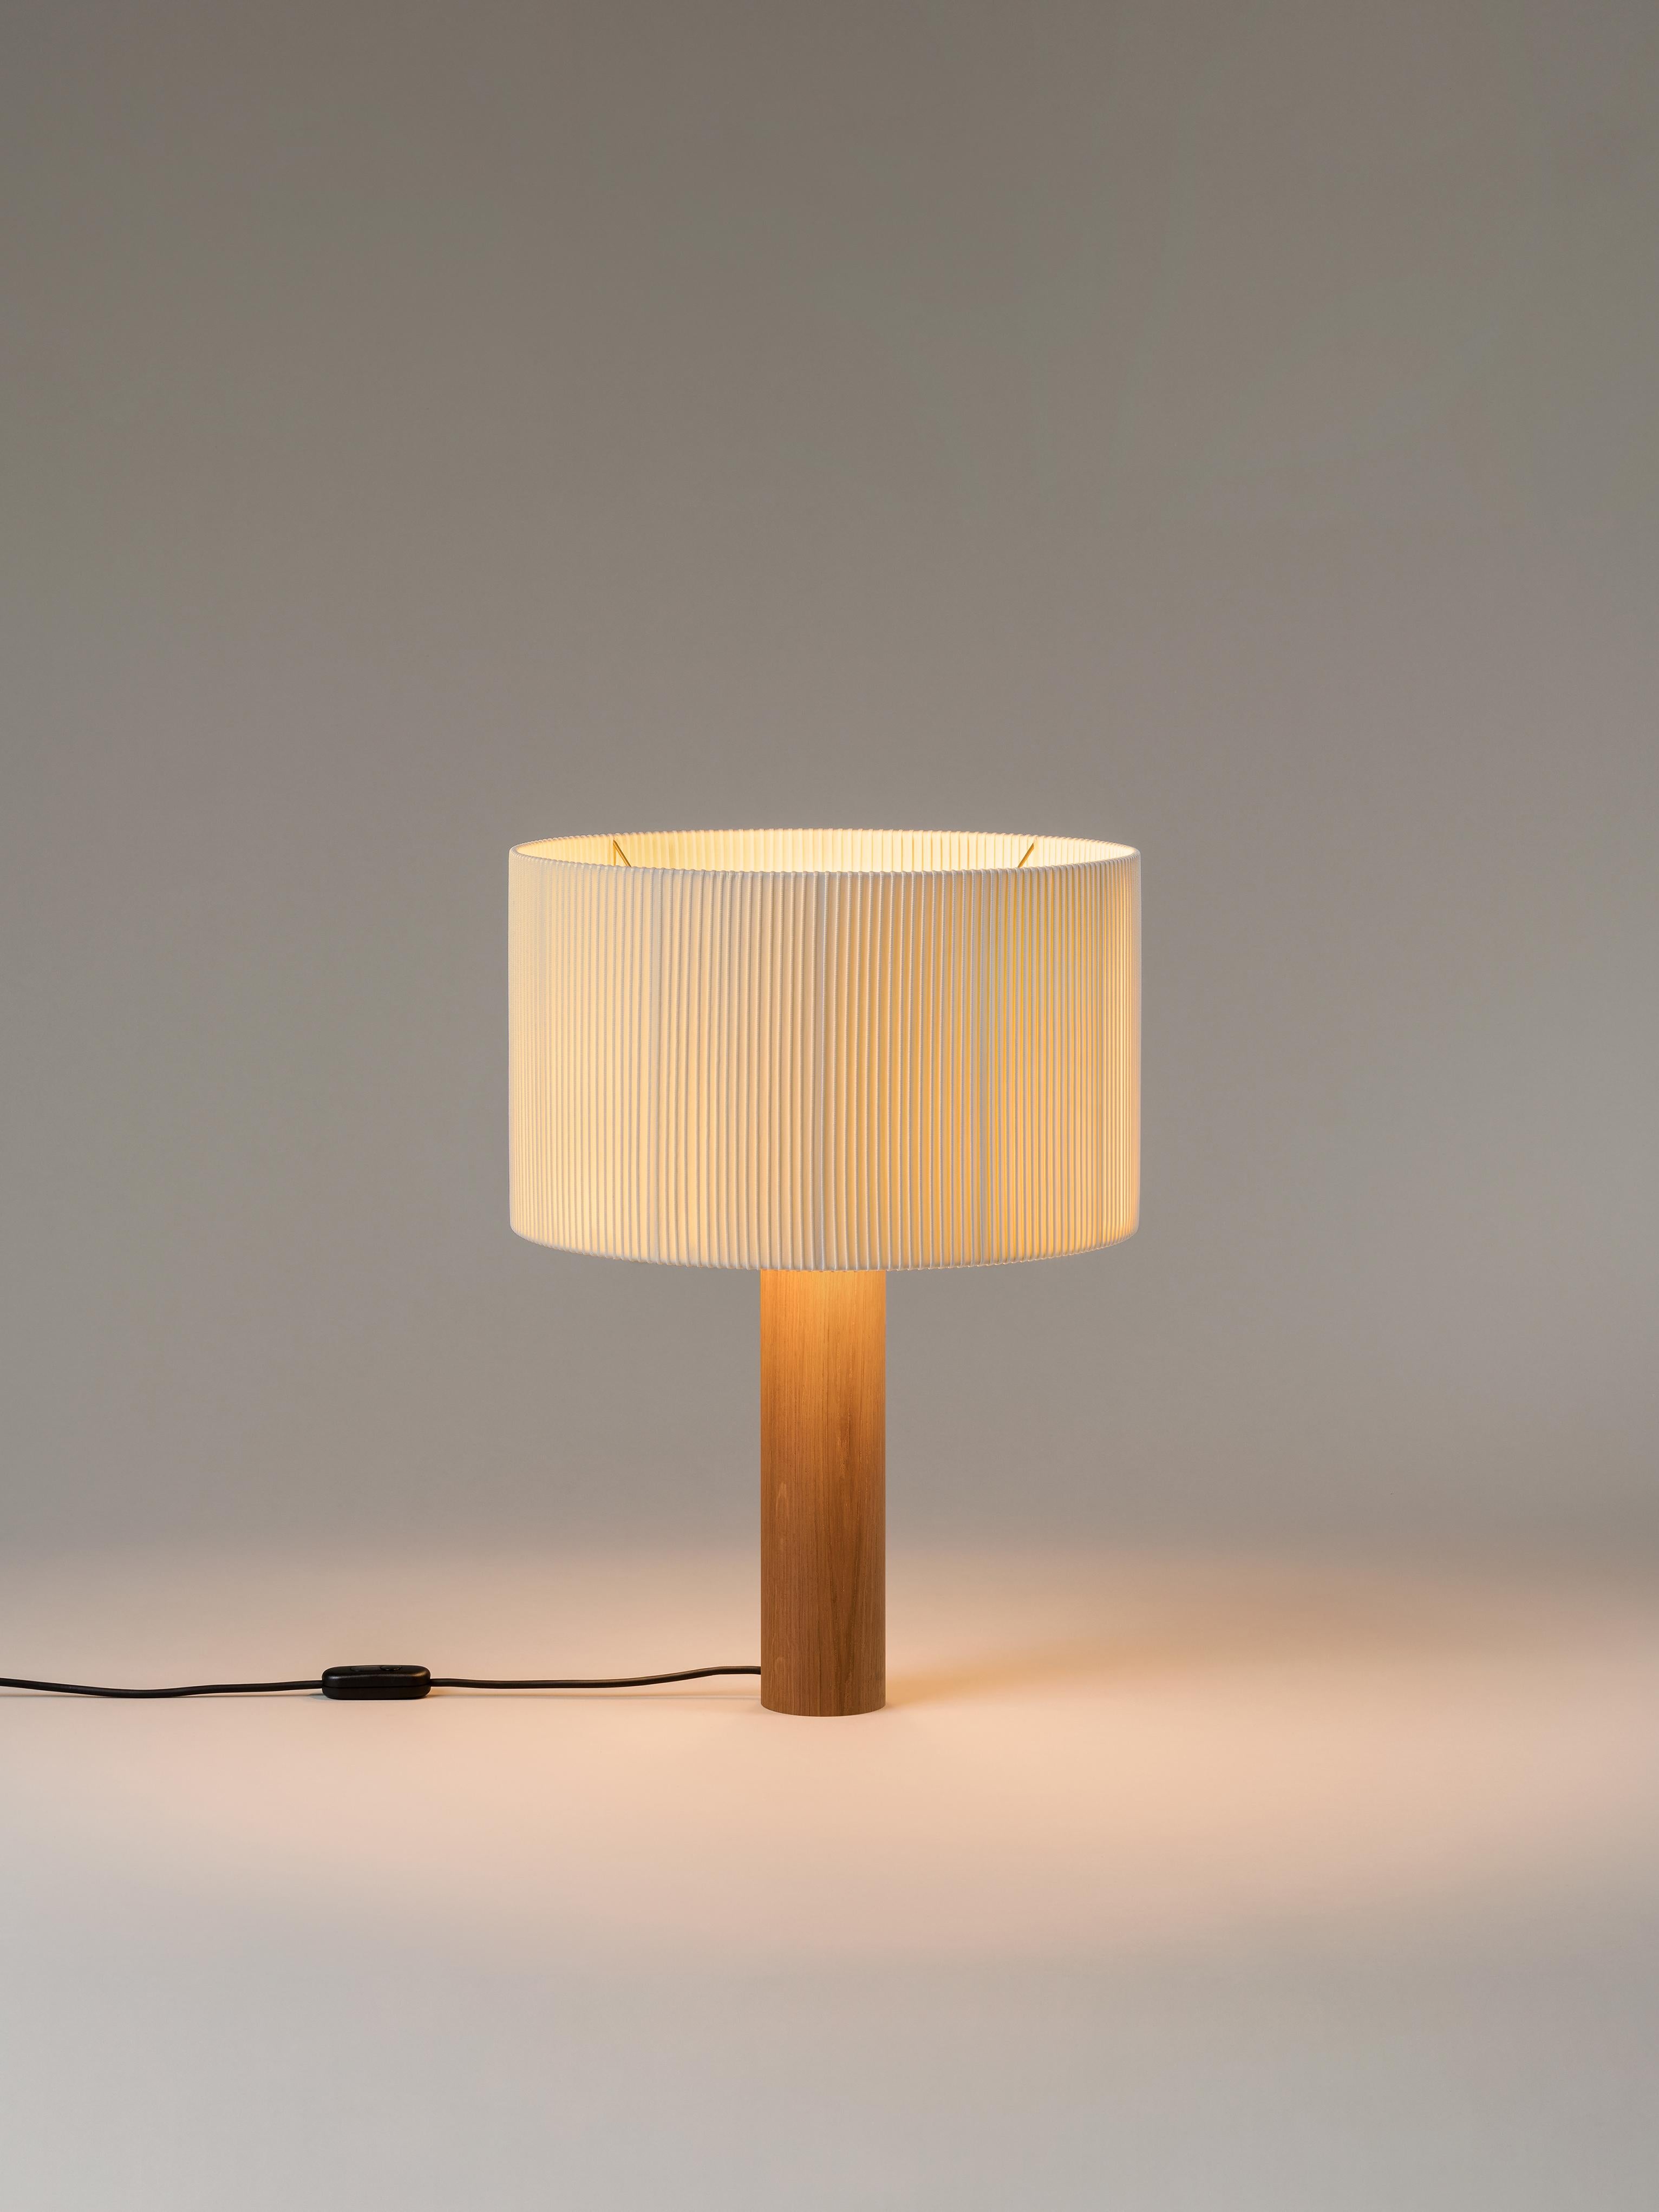 Oak Moragas table lamp by Antoni de Moragas Gallissà
Dimensions: D 45 x H 62 cm
Materials: oak wood.
Available in sapeli or oak wood.

A sturdy wooden cylinder supports a head with three bulbs, surrounded by a generous circular shade. The shade